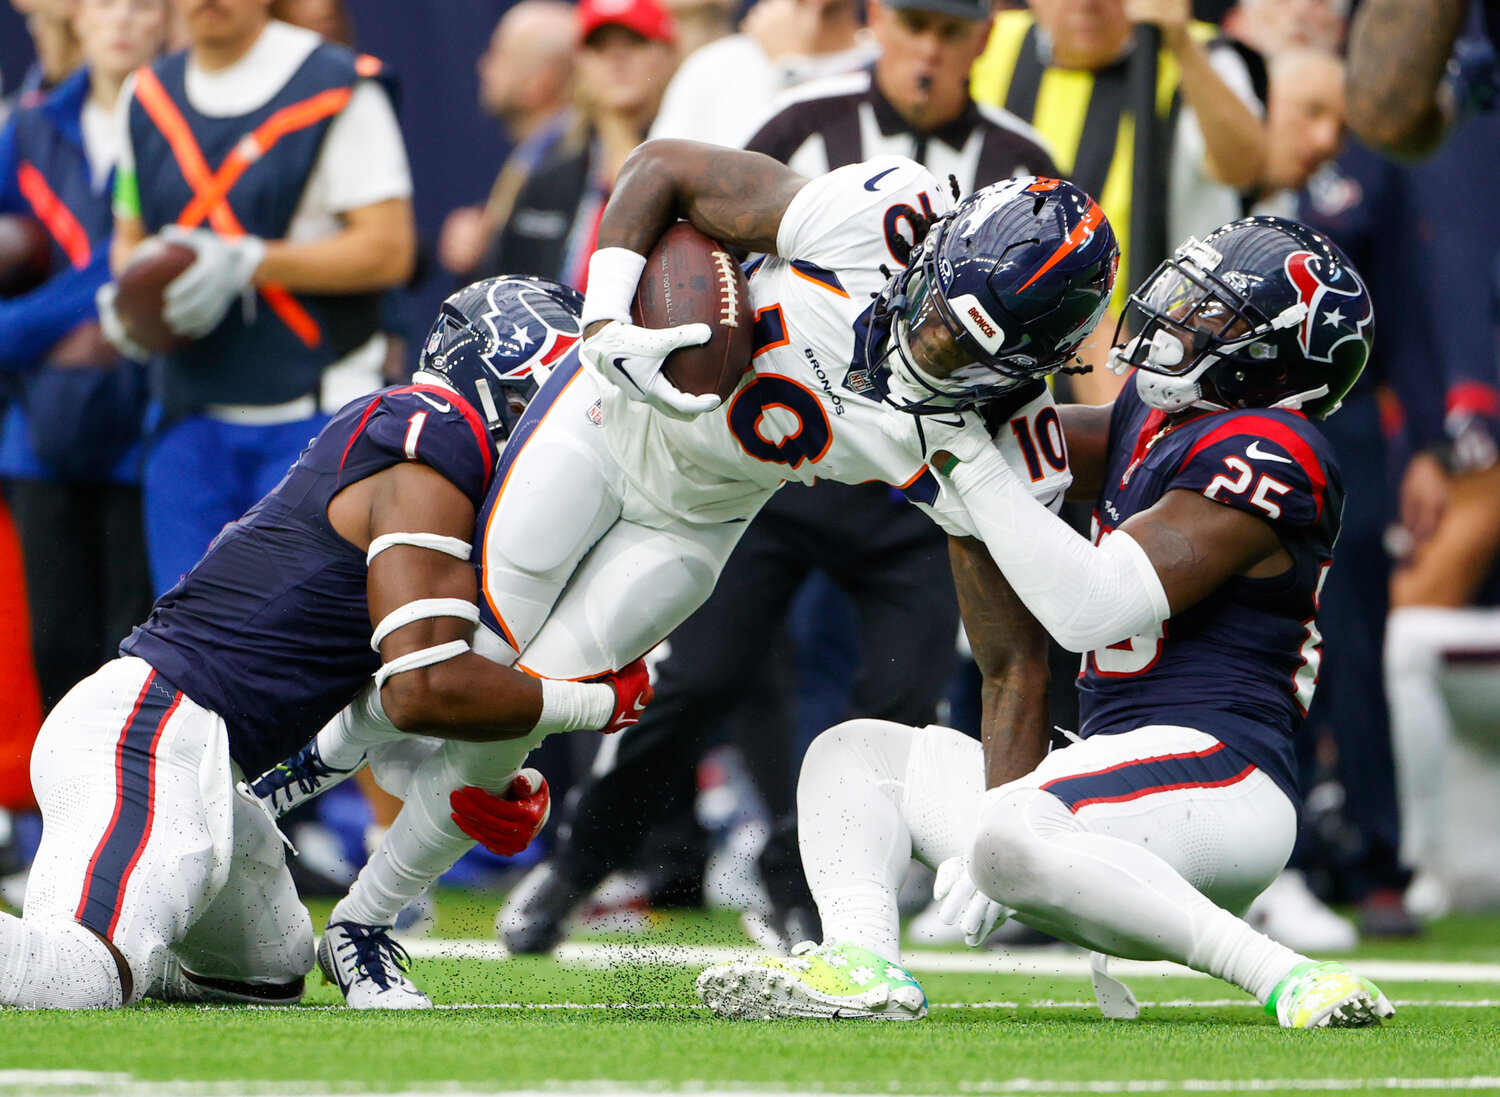 Broncos wide receiver Jerry Jeudy (10) is tackled after a catch during an NFL game between the Texans and the Broncos on December 3, 2023 in Houston. The Texans won, 22-17.